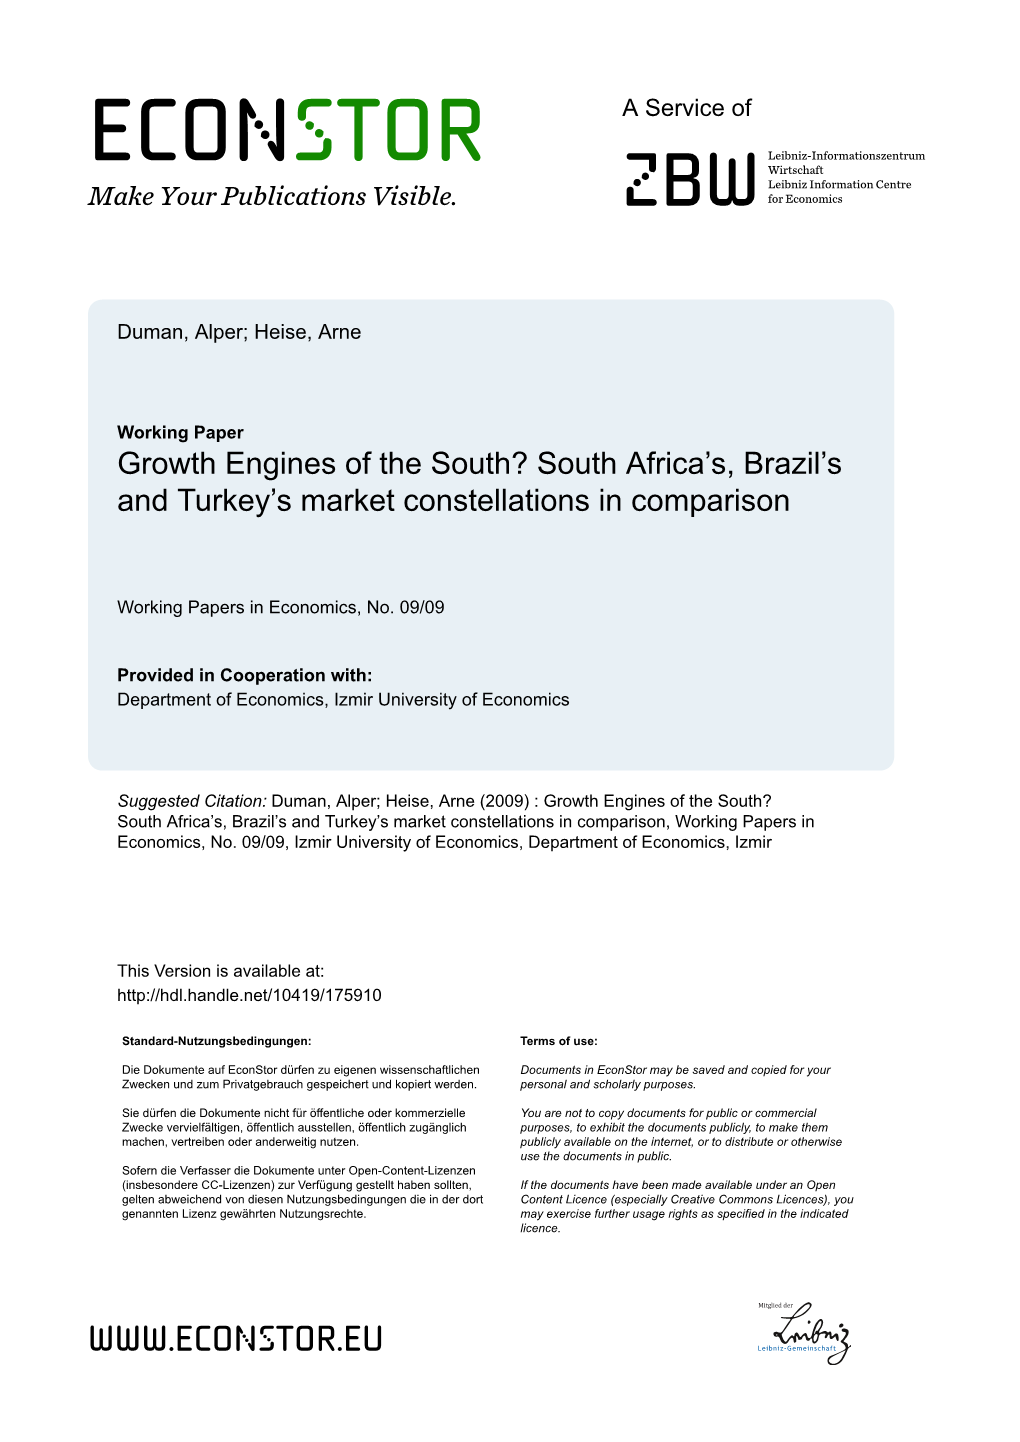 Growth Engines of the South? South Africa's, Brazil's and Turkey's Market Constellations in Comparison